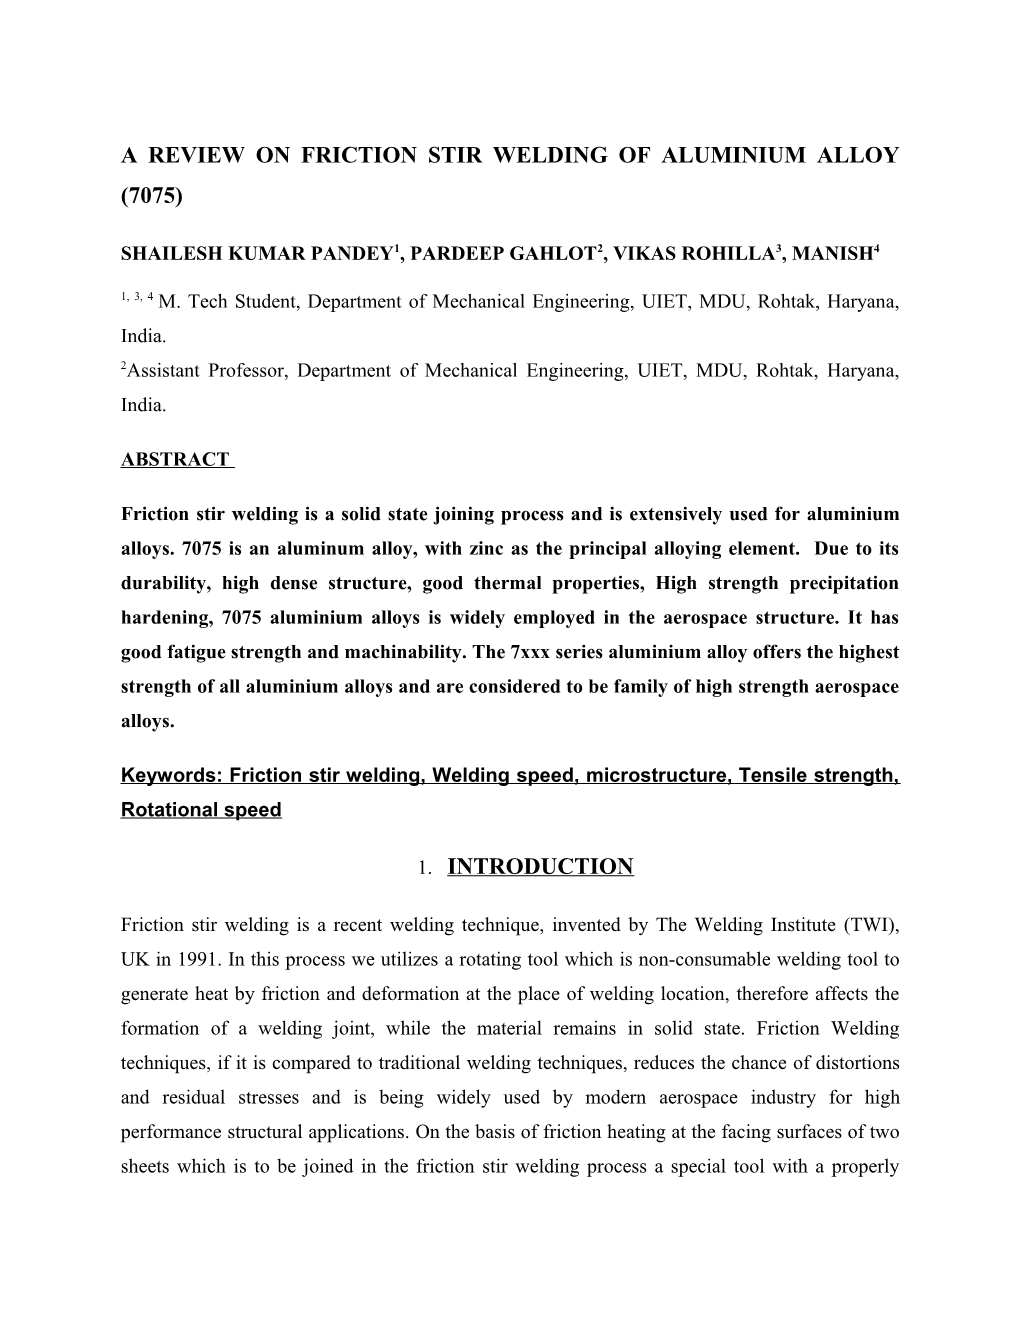 A Review on Friction Stir Welding of Aluminium Alloy (7075)